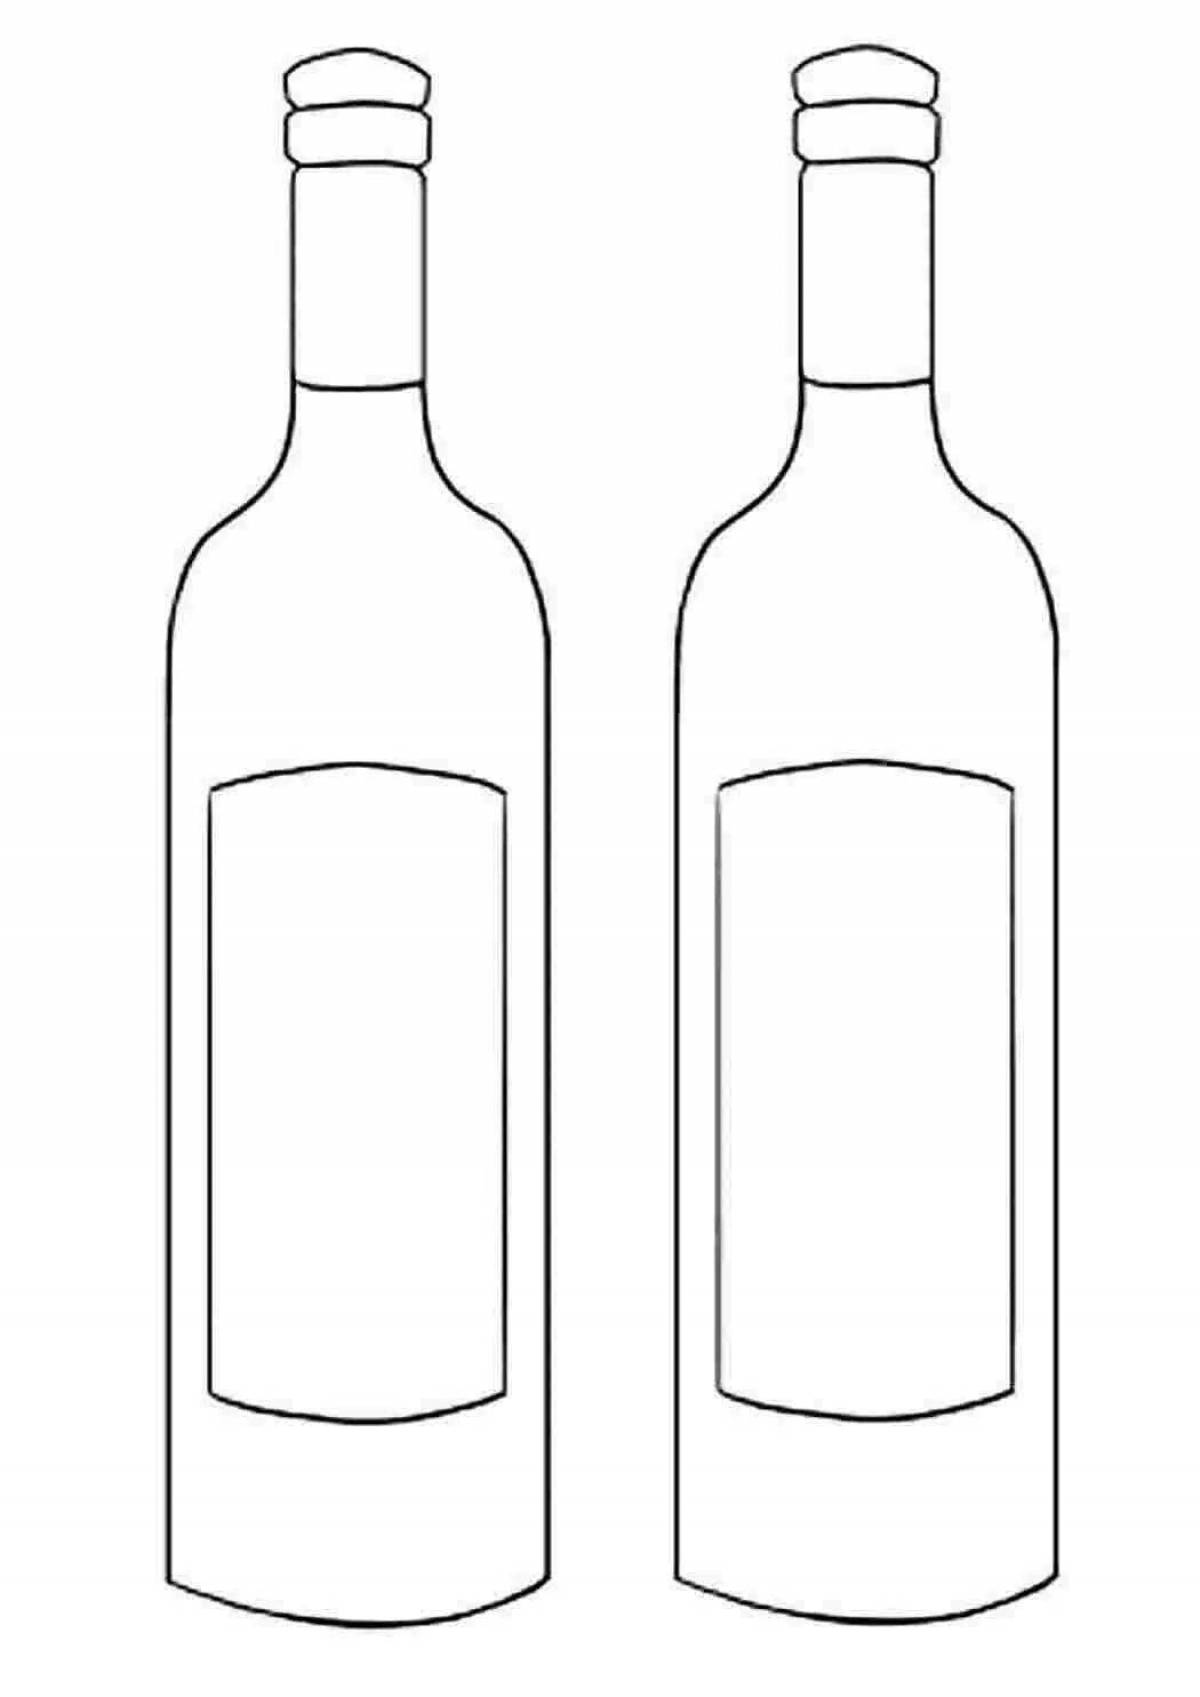 Glowing bottle of alcohol coloring page